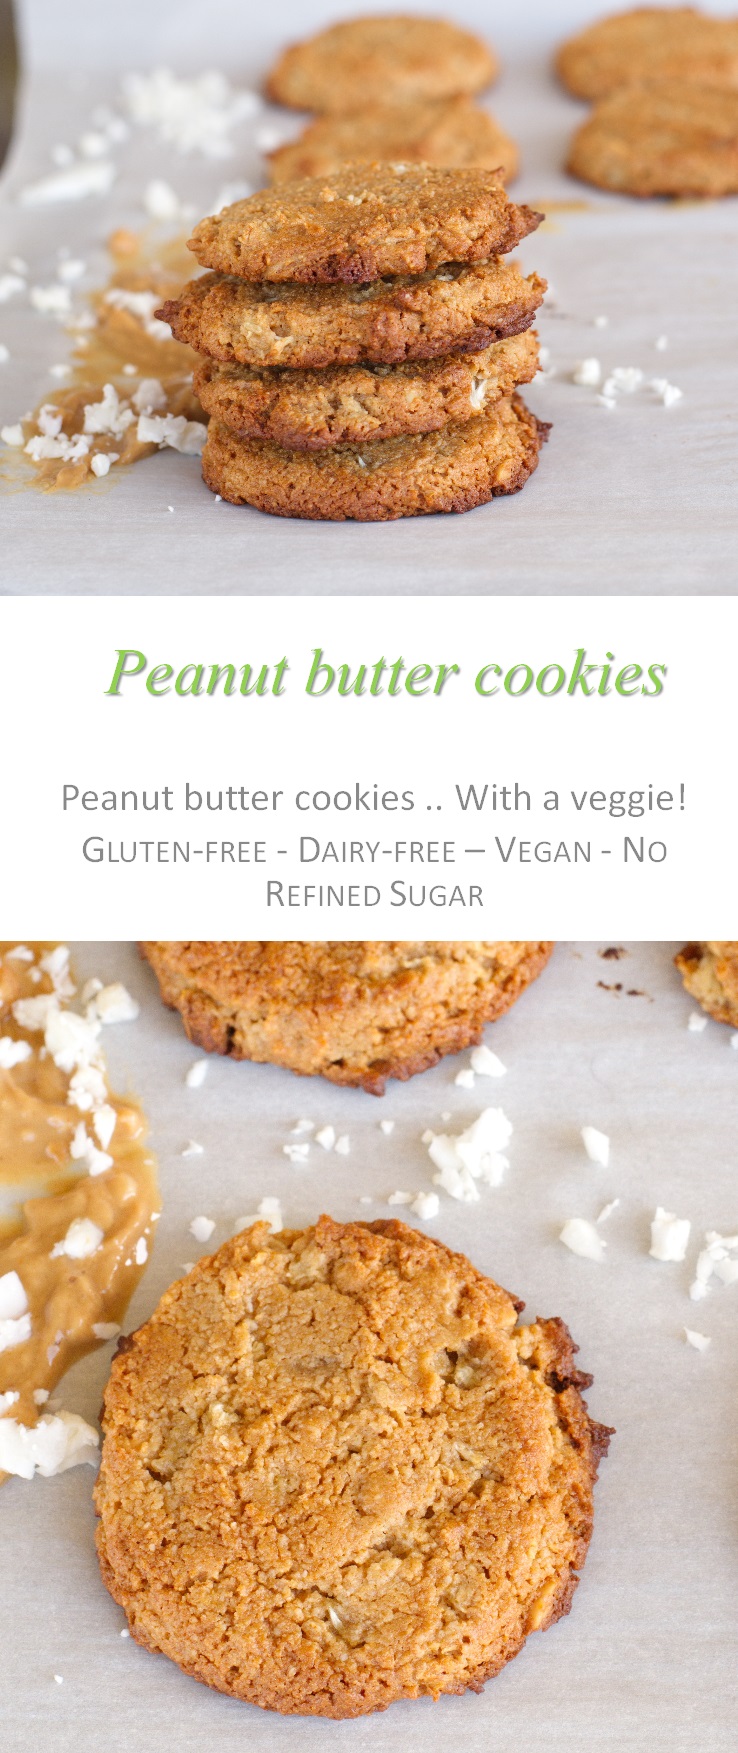 Don't knock these peanut butter cauliflower cookies until you try them - grain-free and no refined sugar ... but with cauliflower for the added crunch! #peanutbutter #cookies #cookathome #glutenfree #dairyfree